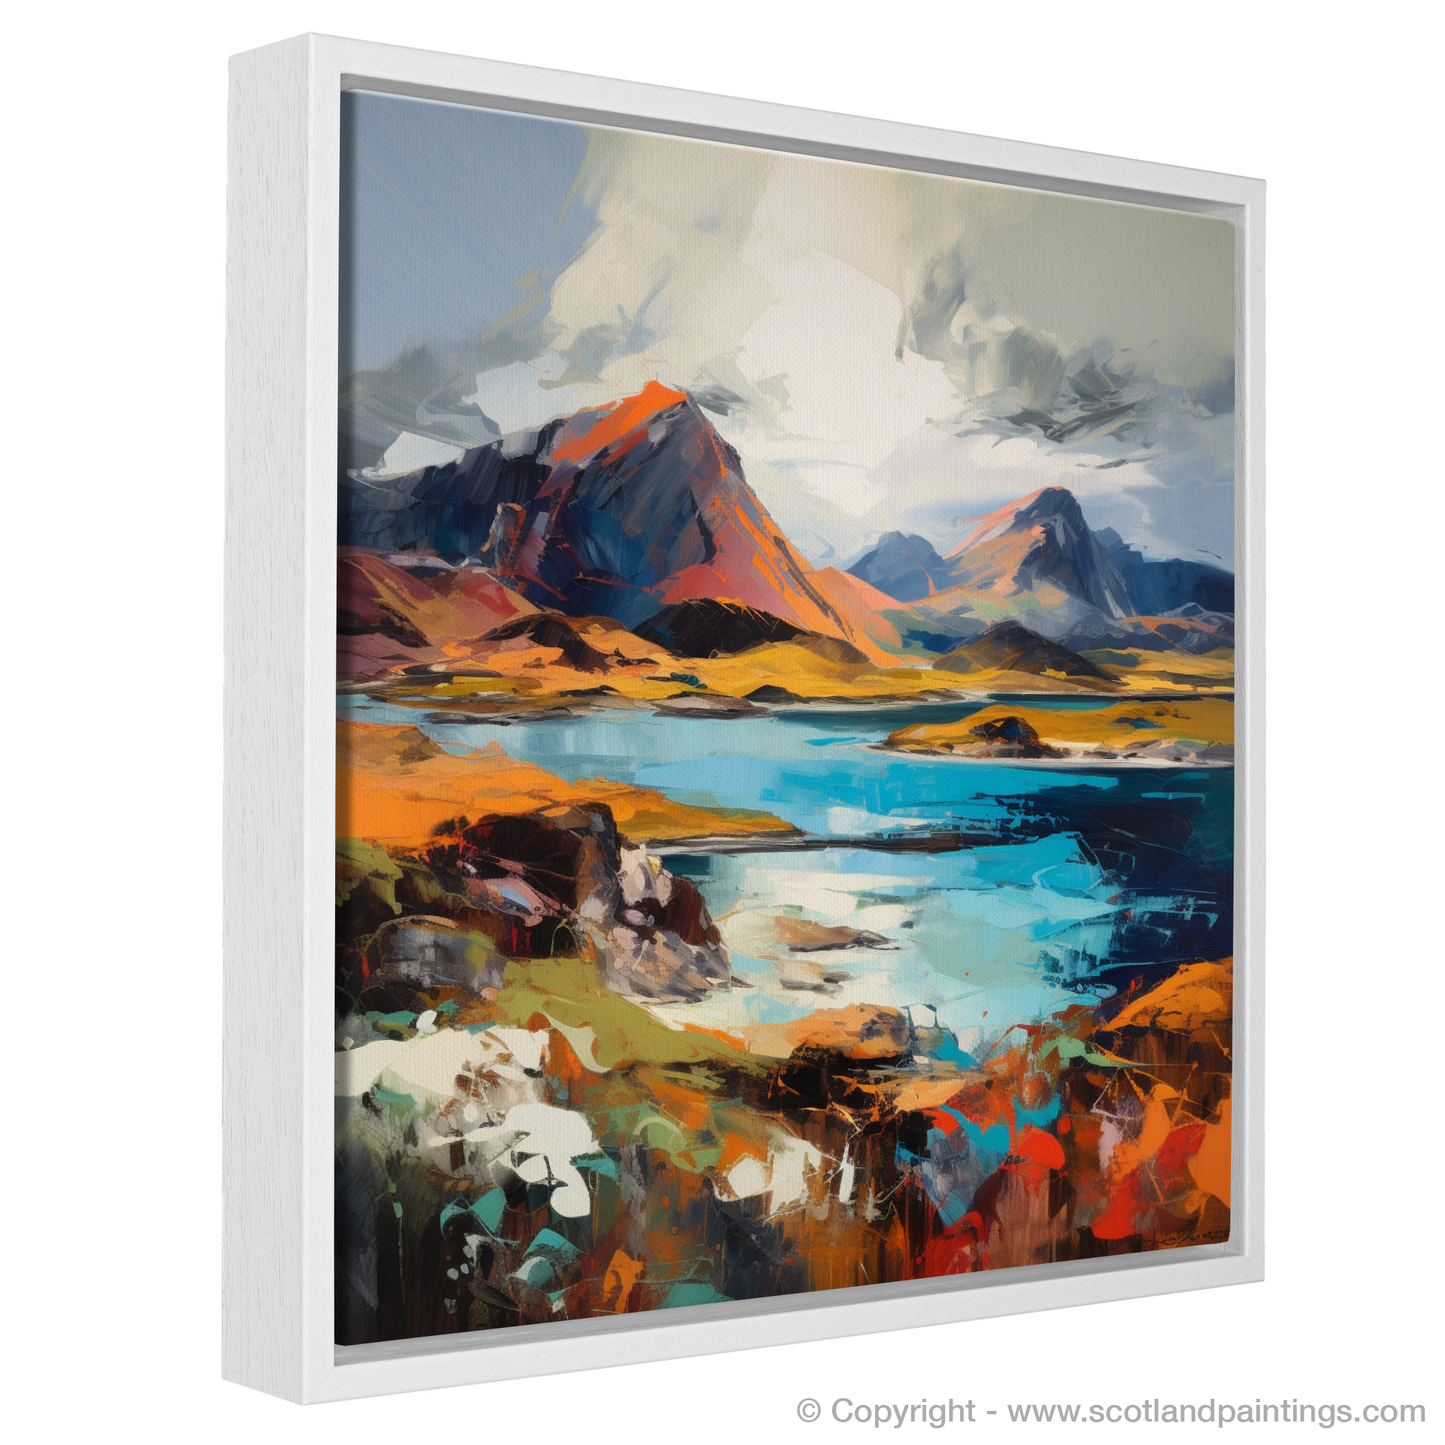 Painting and Art Print of Isle of Rum, Inner Hebrides entitled "Isle of Rum Unleashed: An Expressionist Ode to Scotland's Wild Beauty".